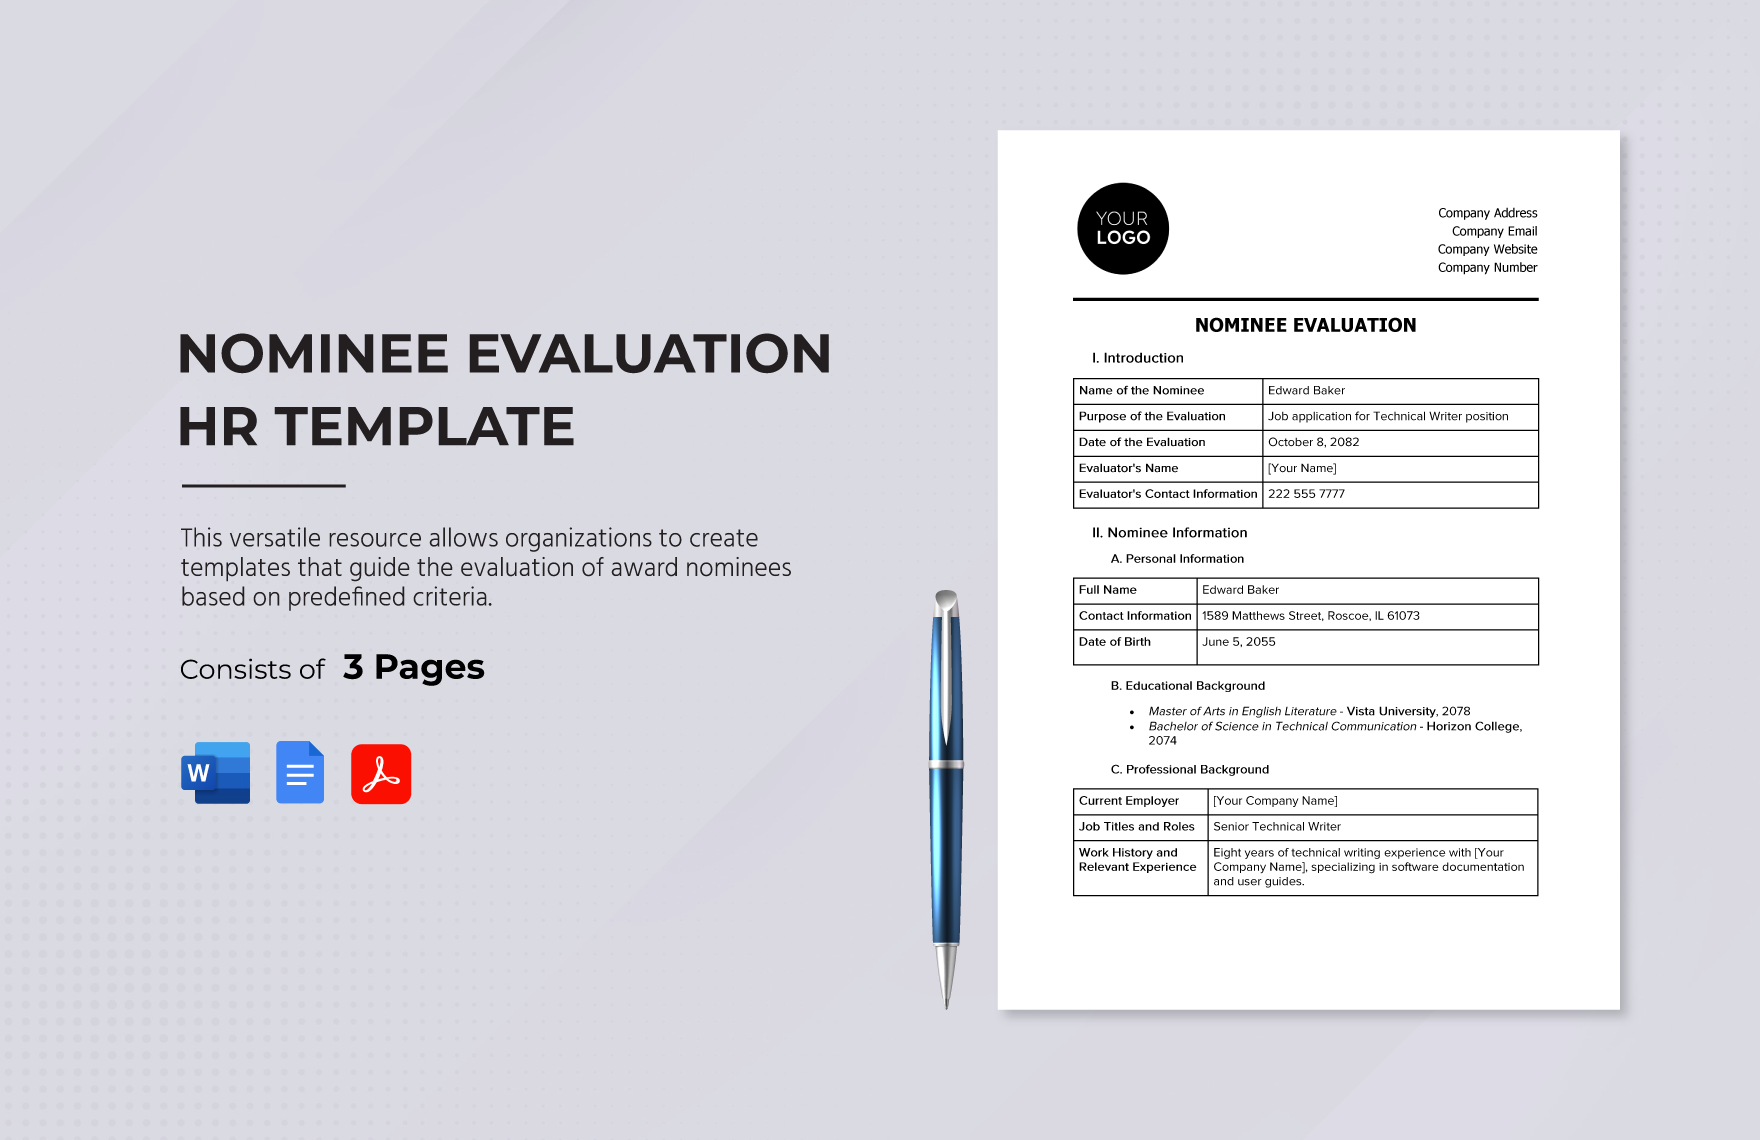 Nominee Evaluation HR Template in Word, Google Docs, PDF